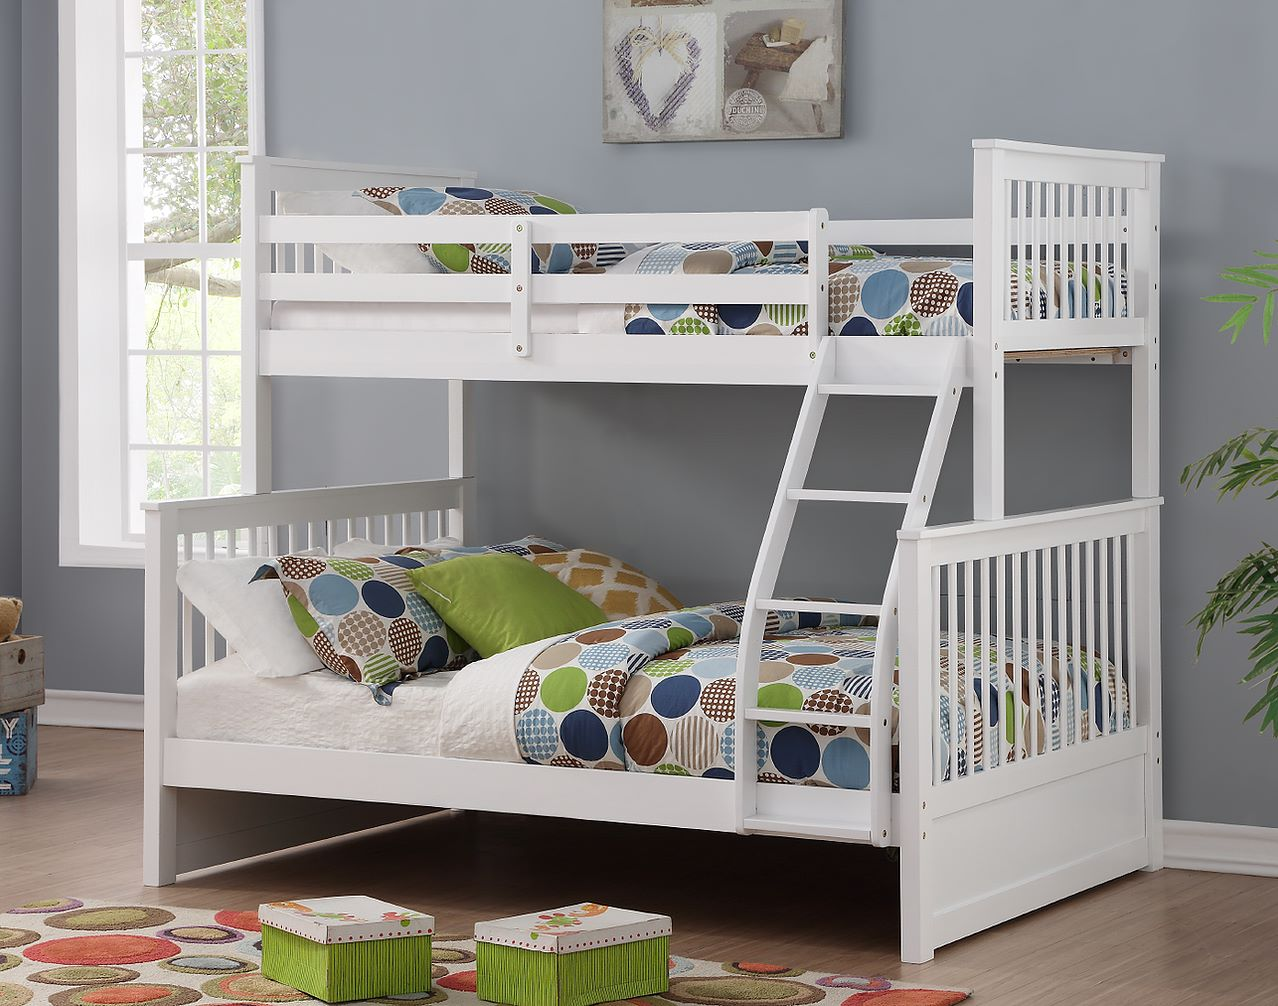 Single/Double White Bunk Bed 122